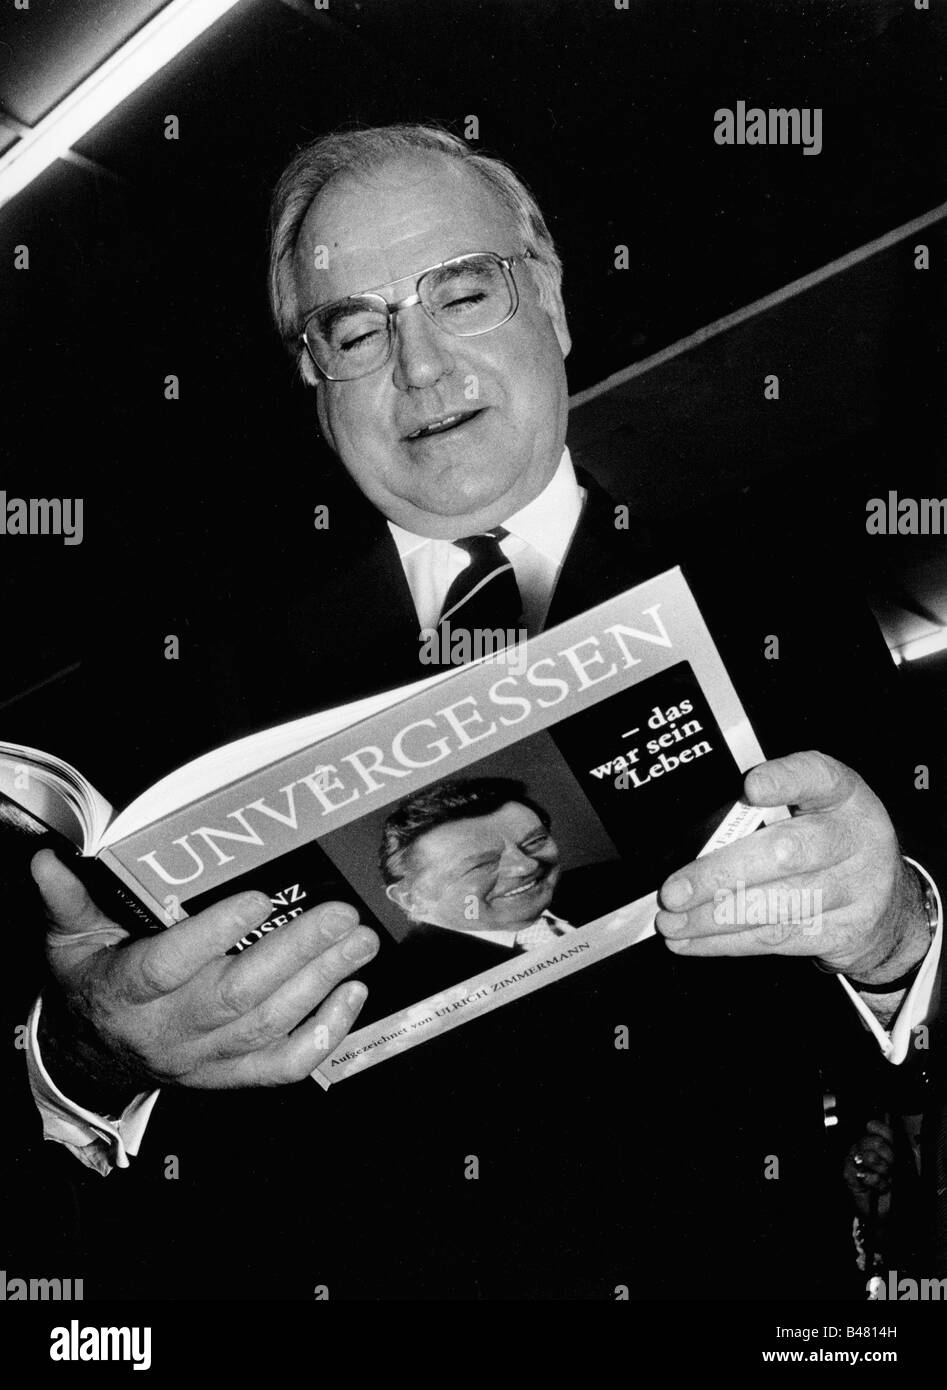 Kohl, Helmut, * 3.4.1930, German politician (CDU), chancellor of Germany 1982 - 1998, half length, with memorial book of pictures about Franz Josef Strauss 'Unvergessen' (Unforgotten) by Ulrich Zimmermann, party conference of CSU, Munich, 19.11.1988, Stock Photo